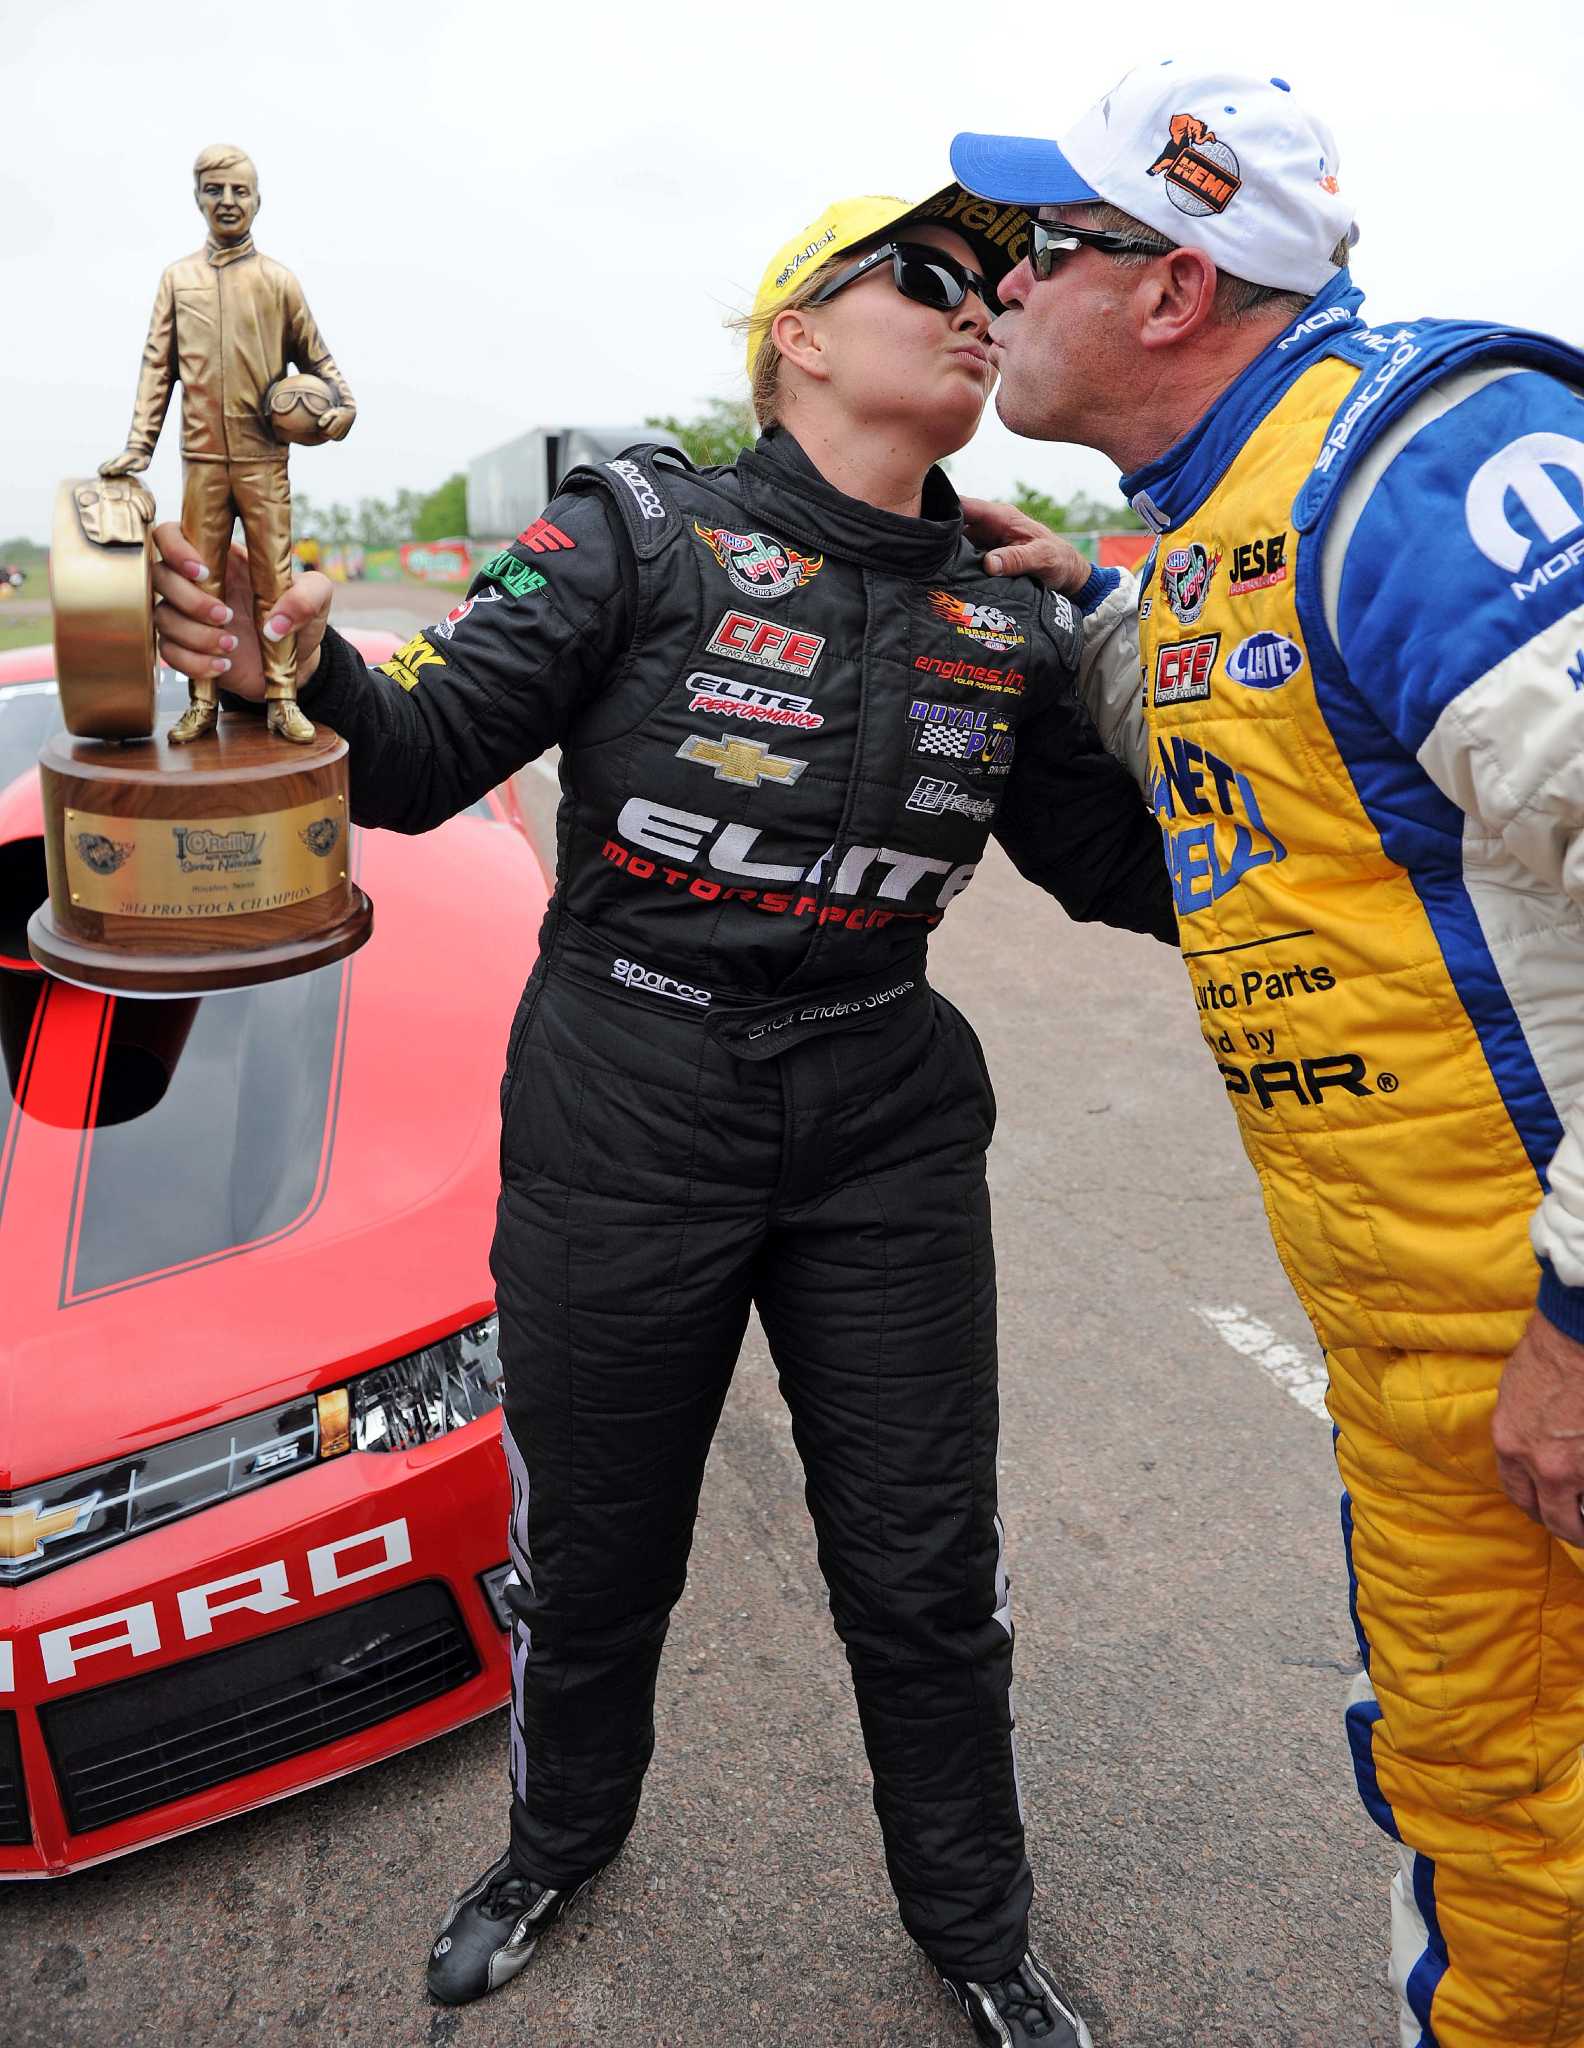 Pro Stock win makes it a special homecoming for Enders-Stevens - Houston Chronicle